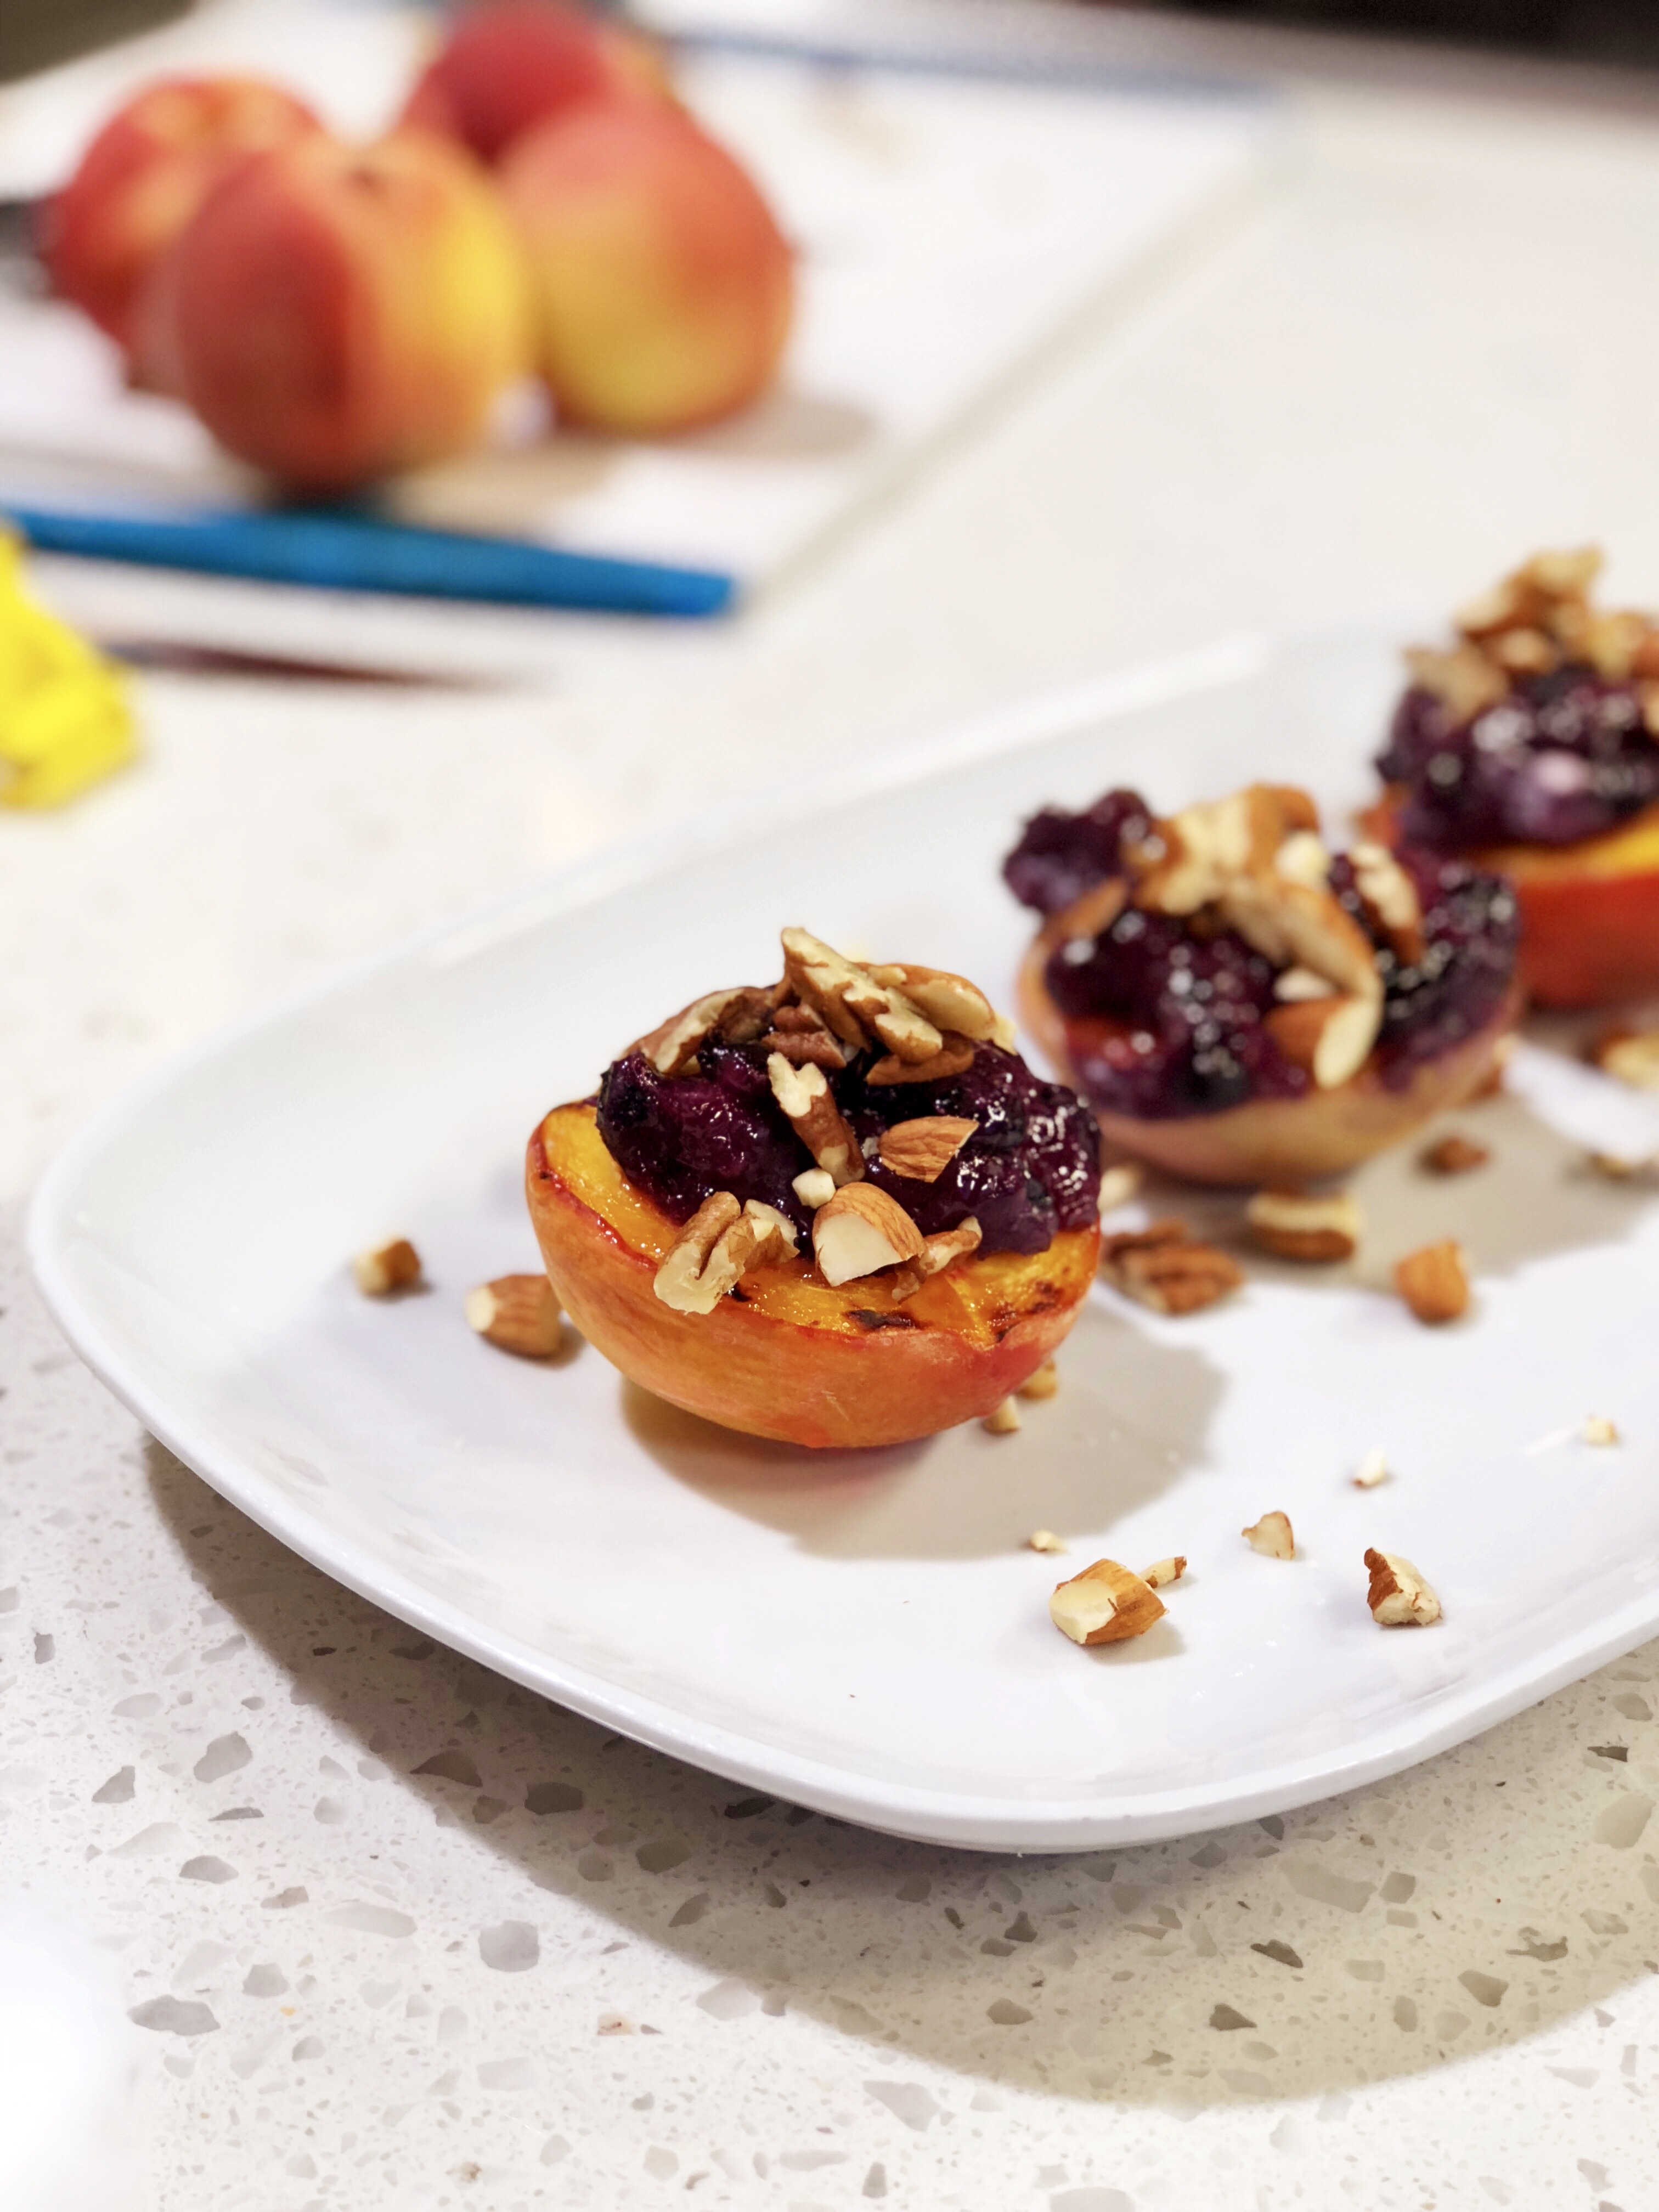 https://cookingwithchefbryan.com/wp-content/uploads/2018/07/Glazed-Peaches-Broiled-with-Blueberry-Compote-and-Cream-Cheese.jpg